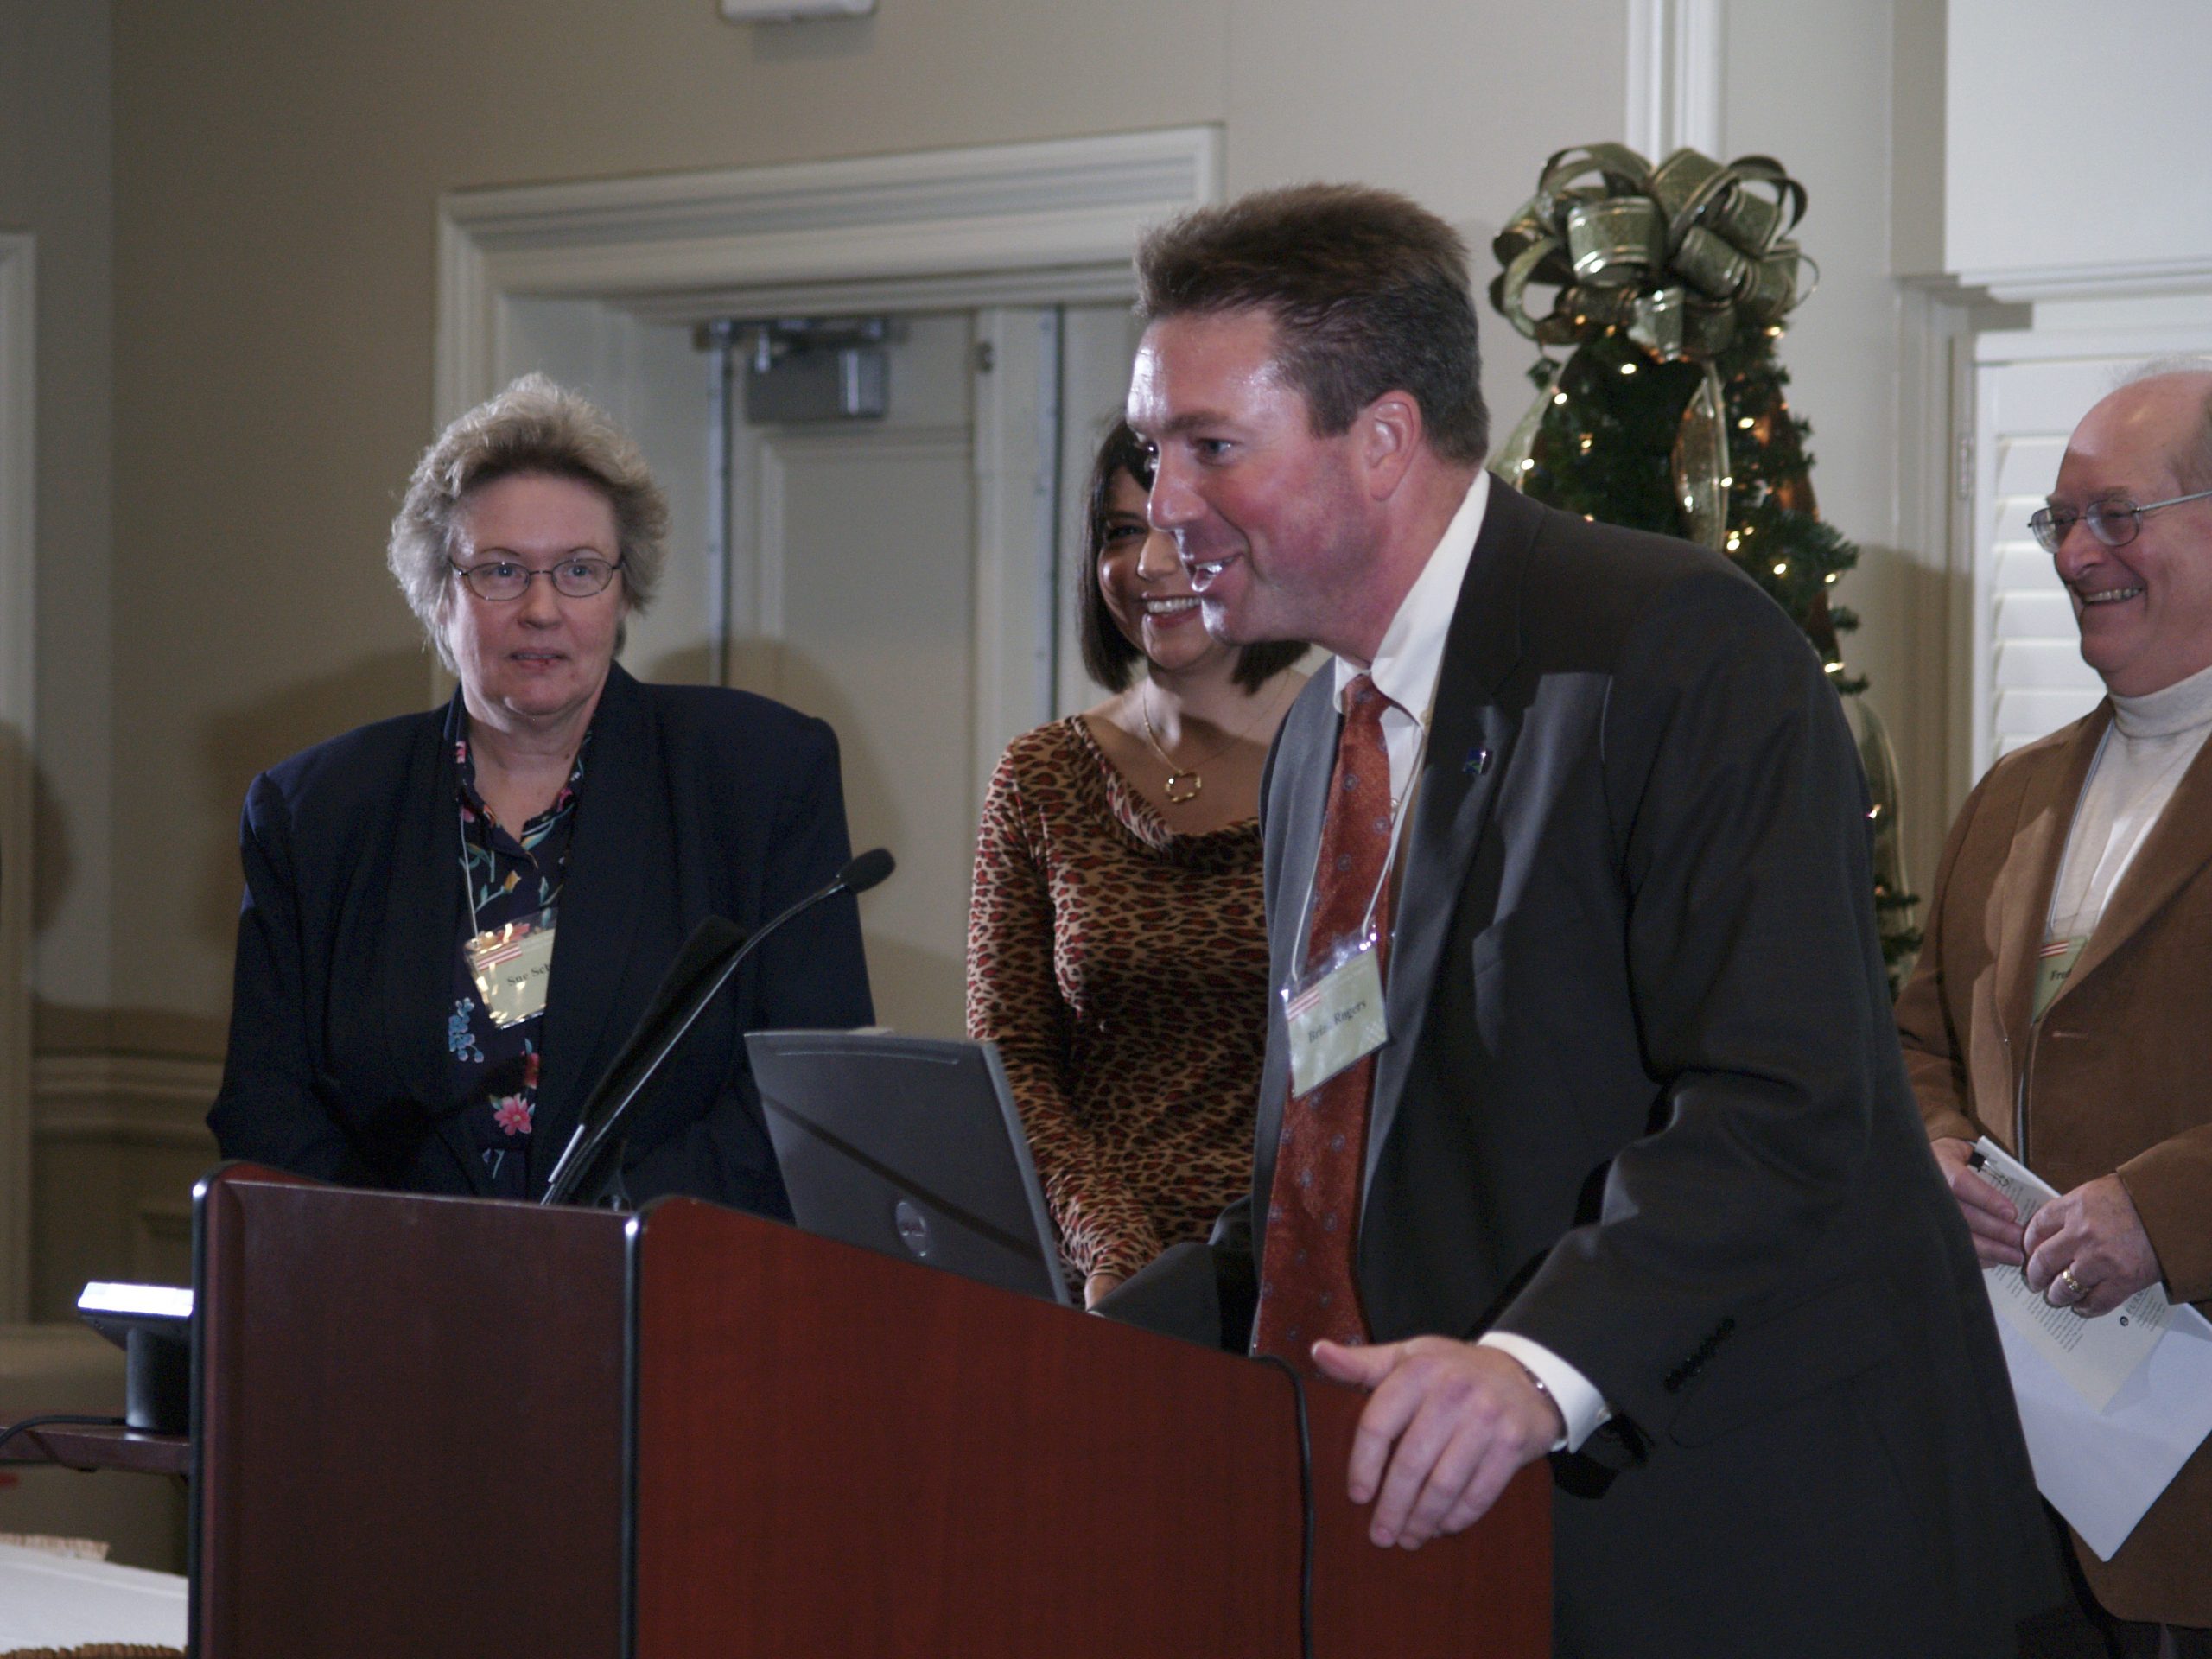 (l-r) Sue Schneider, Phyllis Martin (guest), Brian Rogers presenting, and Fred Baus